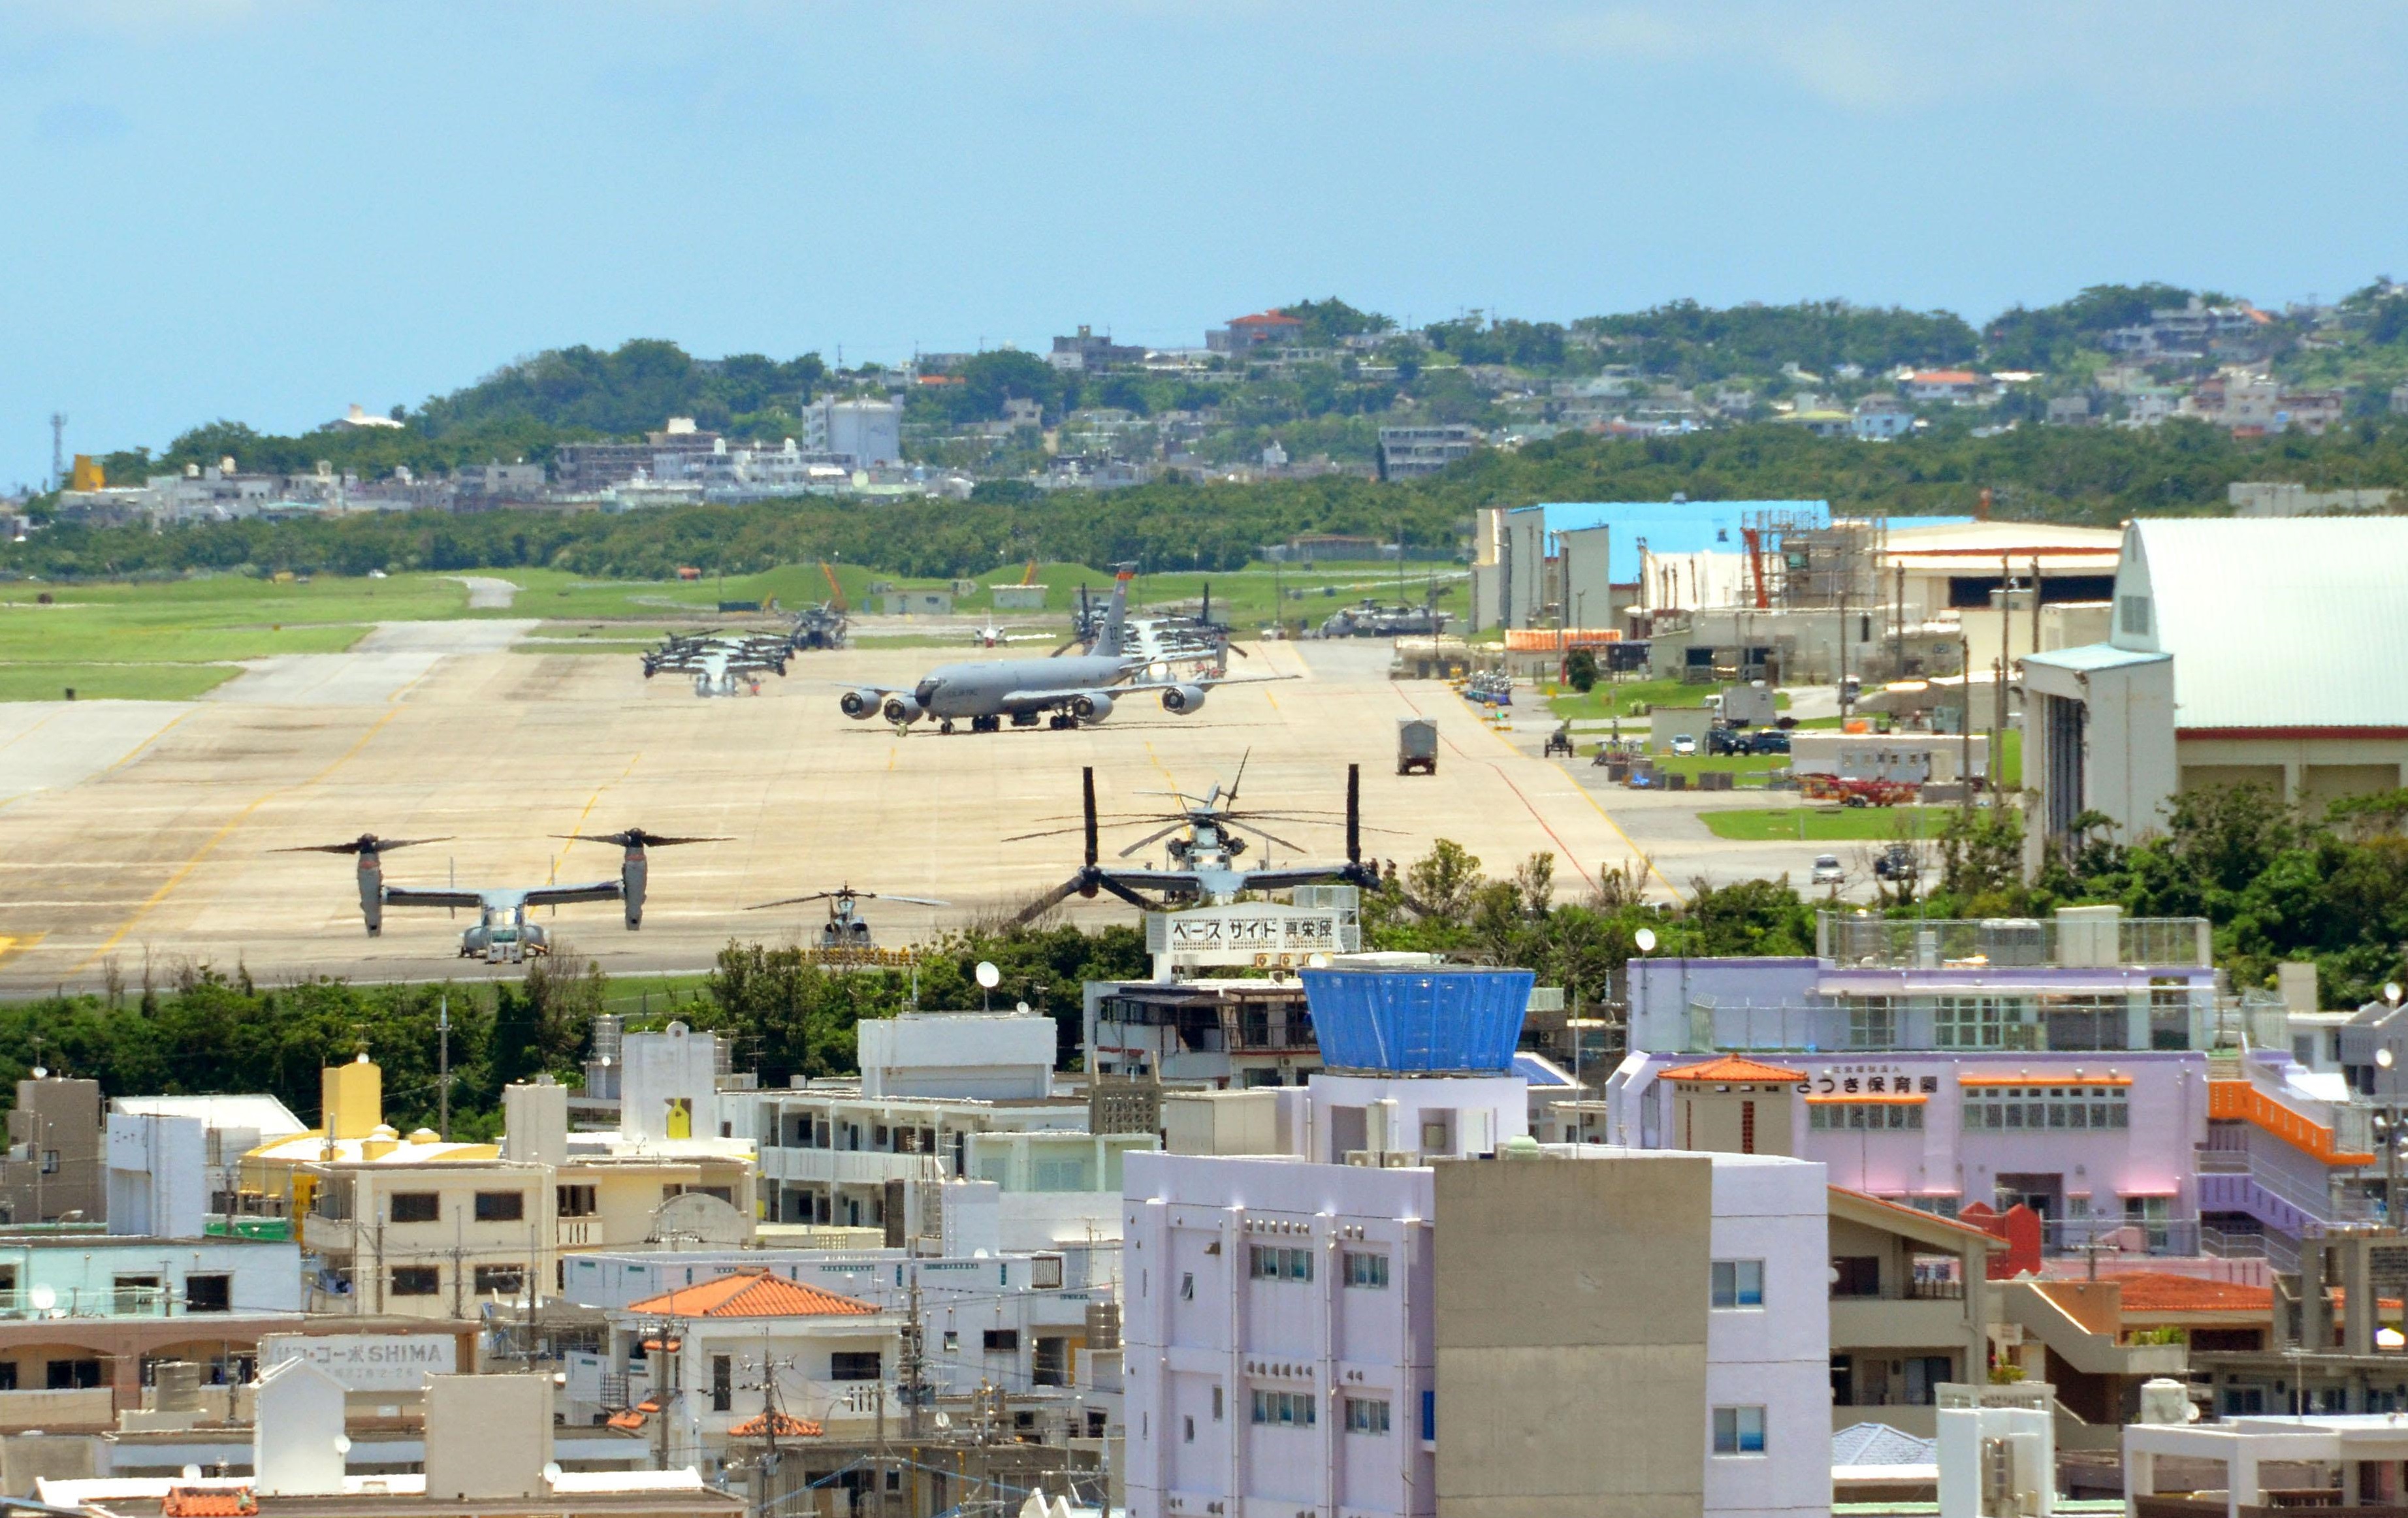 U.S. Marine Corp Air Station Futenma is located close to residential areas in Ginowan, Okinawa Prefecture. | KYODO